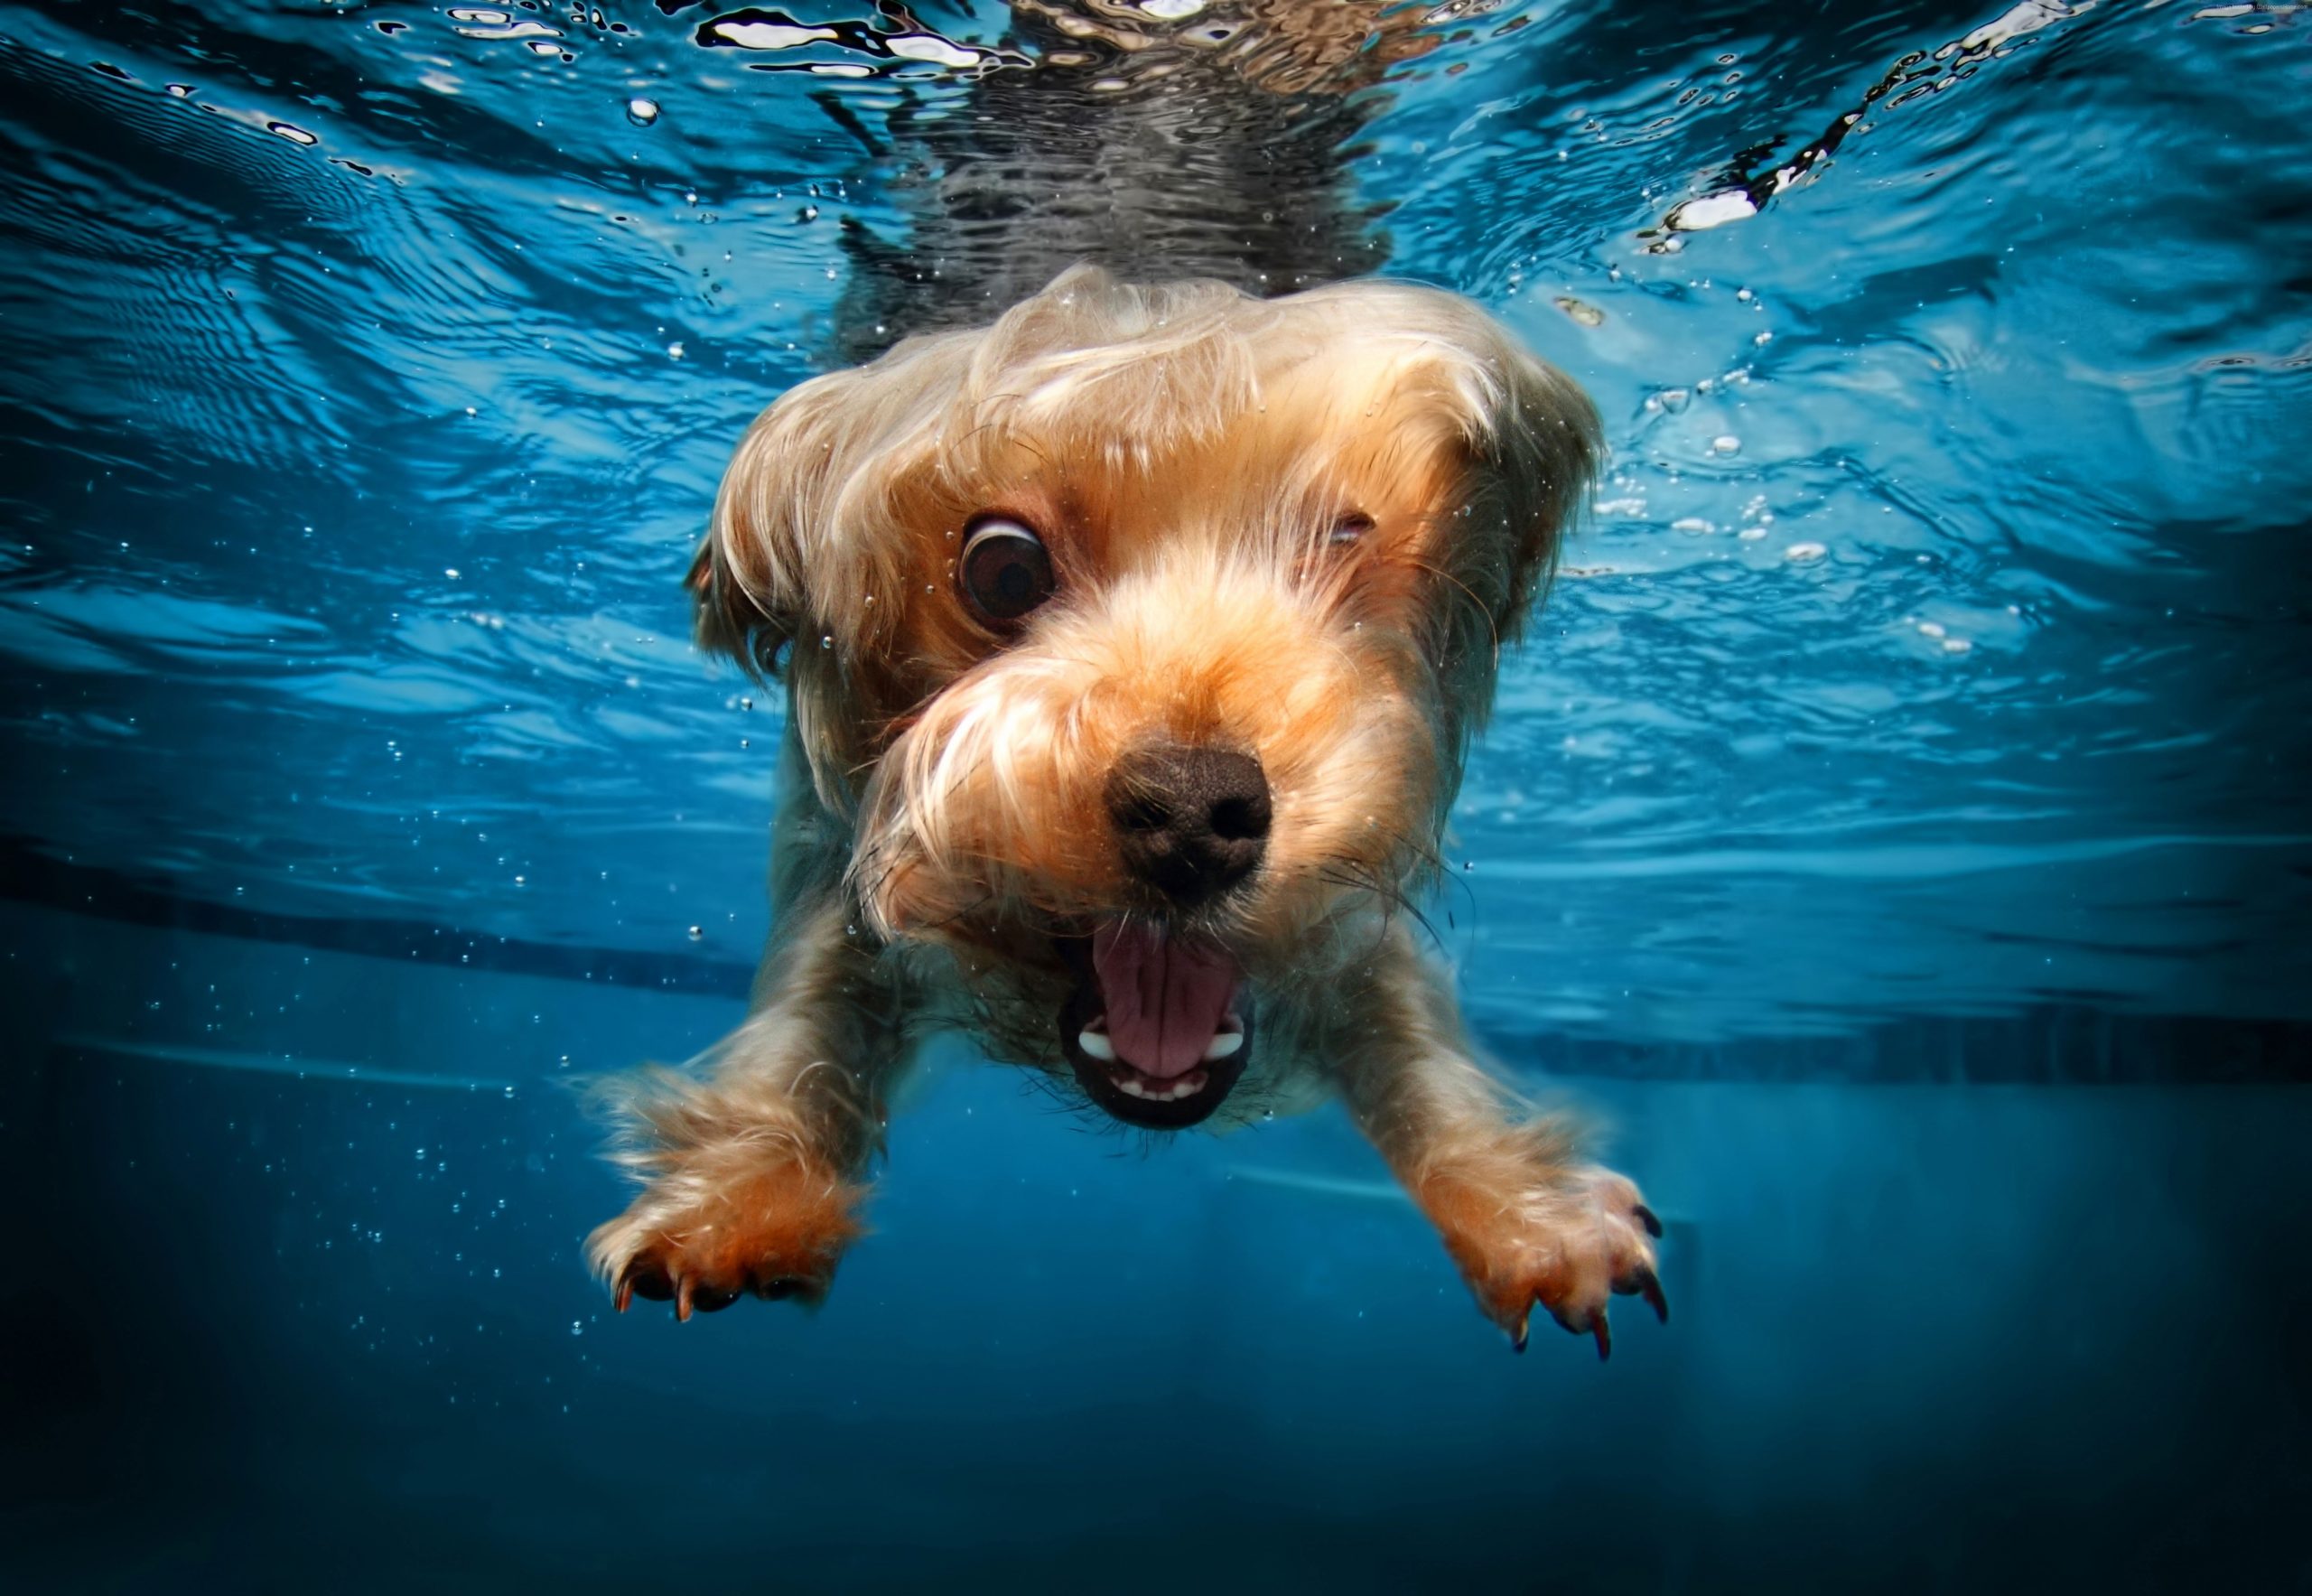 Cute animals wallpaper, terrier, funny, dog, underwater, canine, one animal